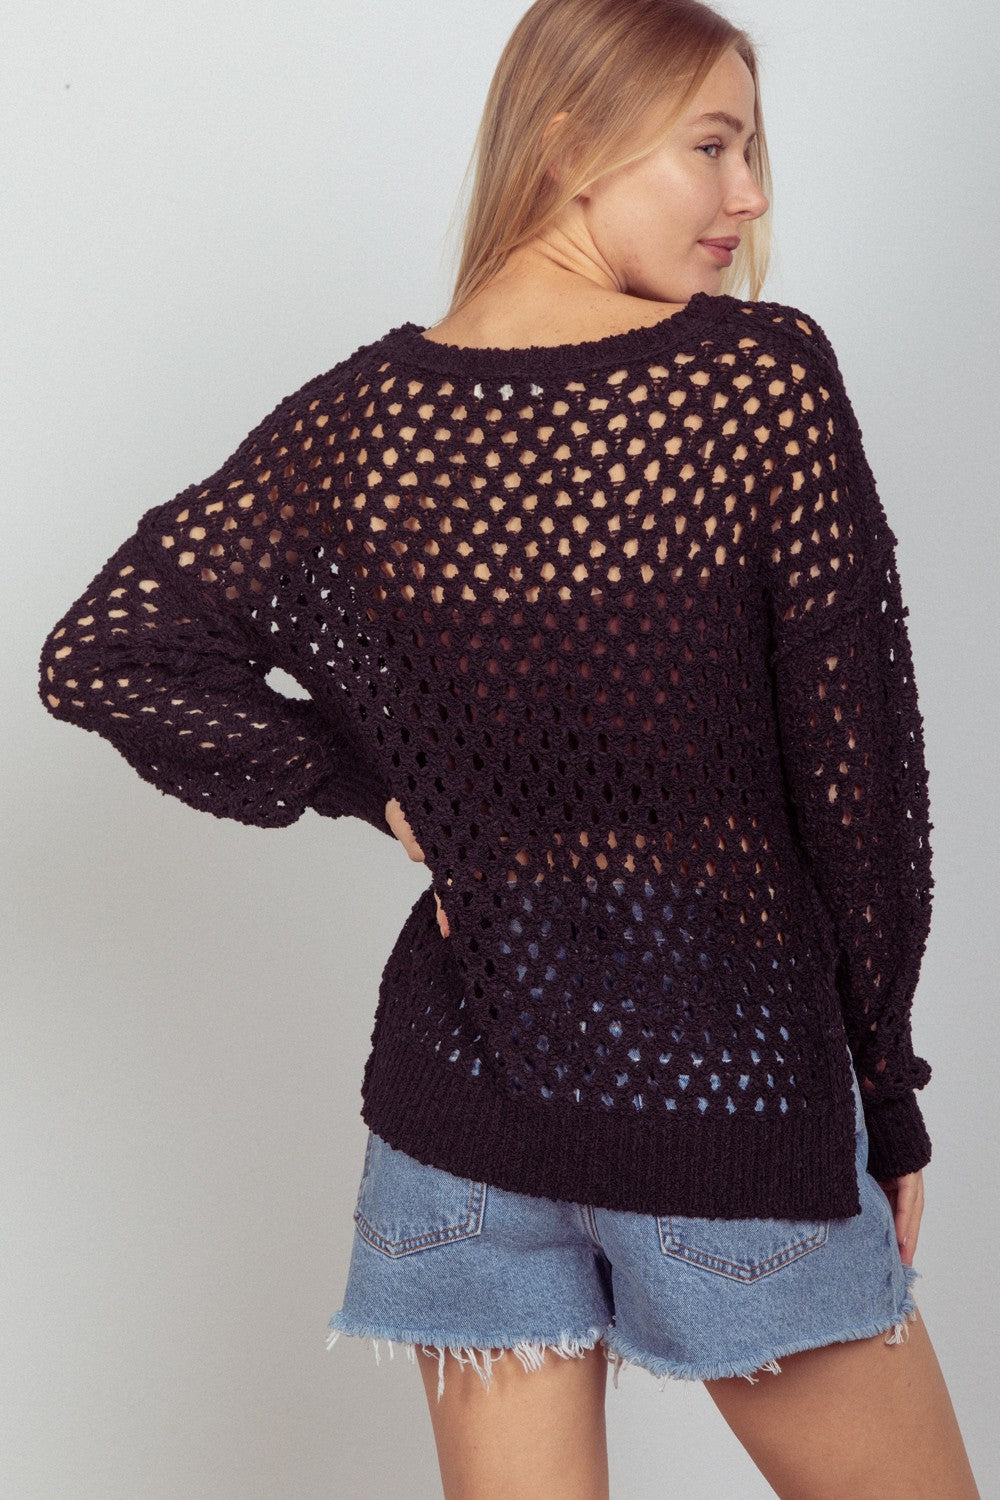 The Chelsea Holey Knit Sweater